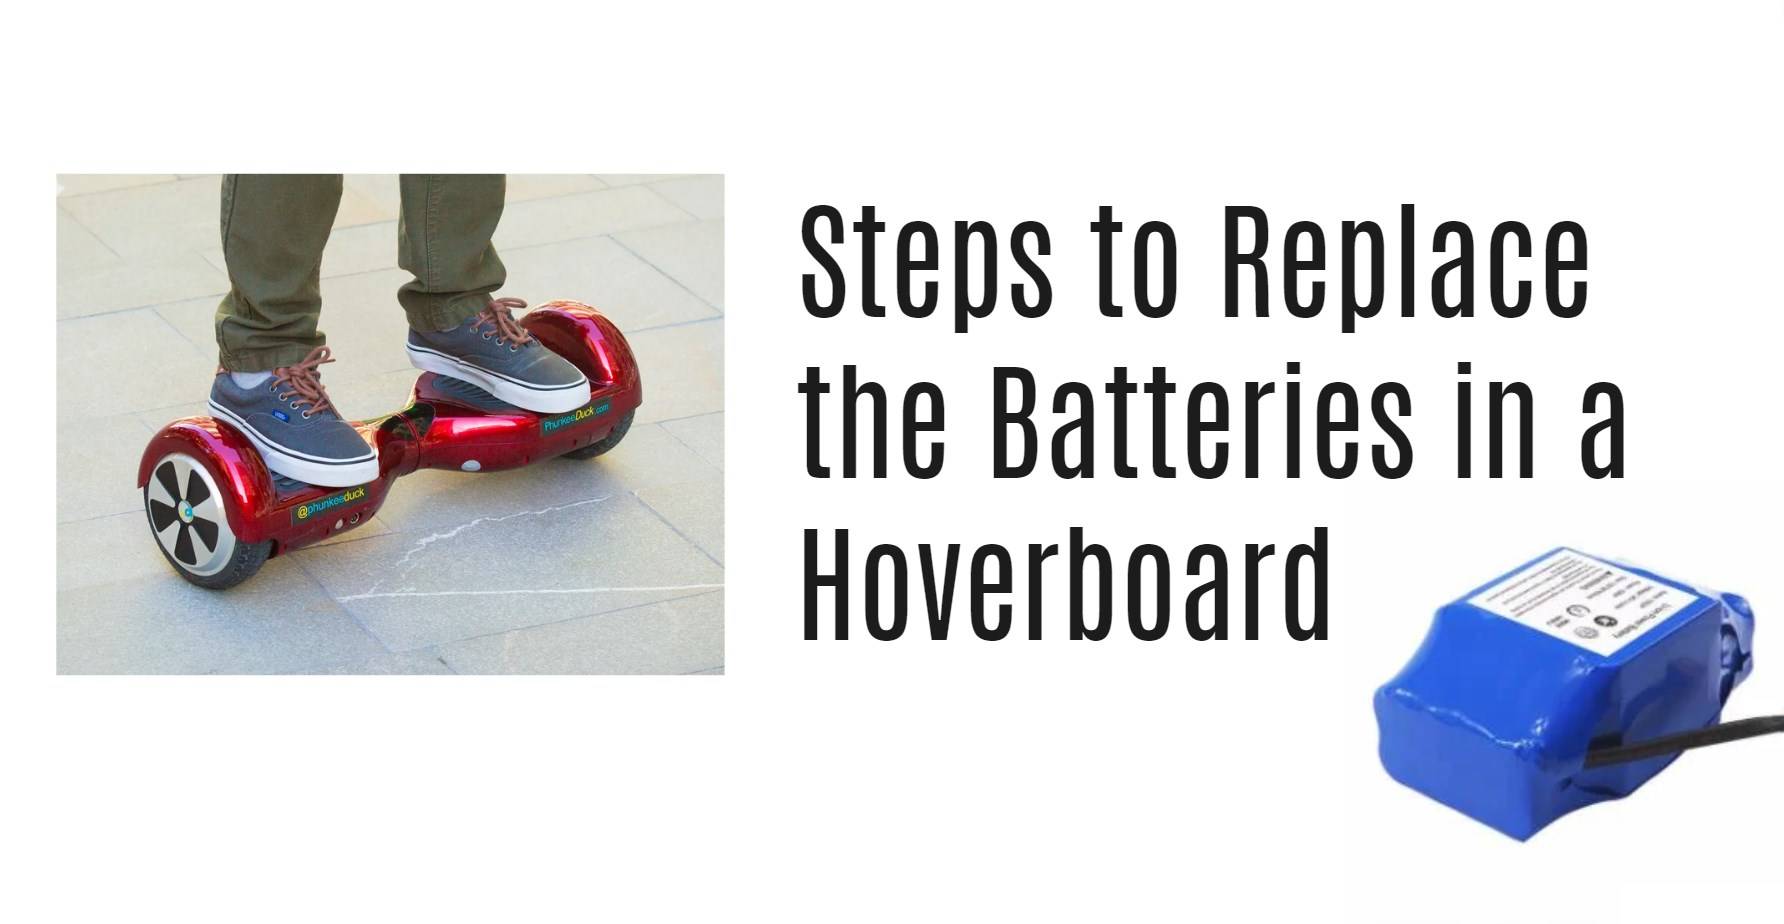 Steps to Replace the Batteries in a Hoverboard